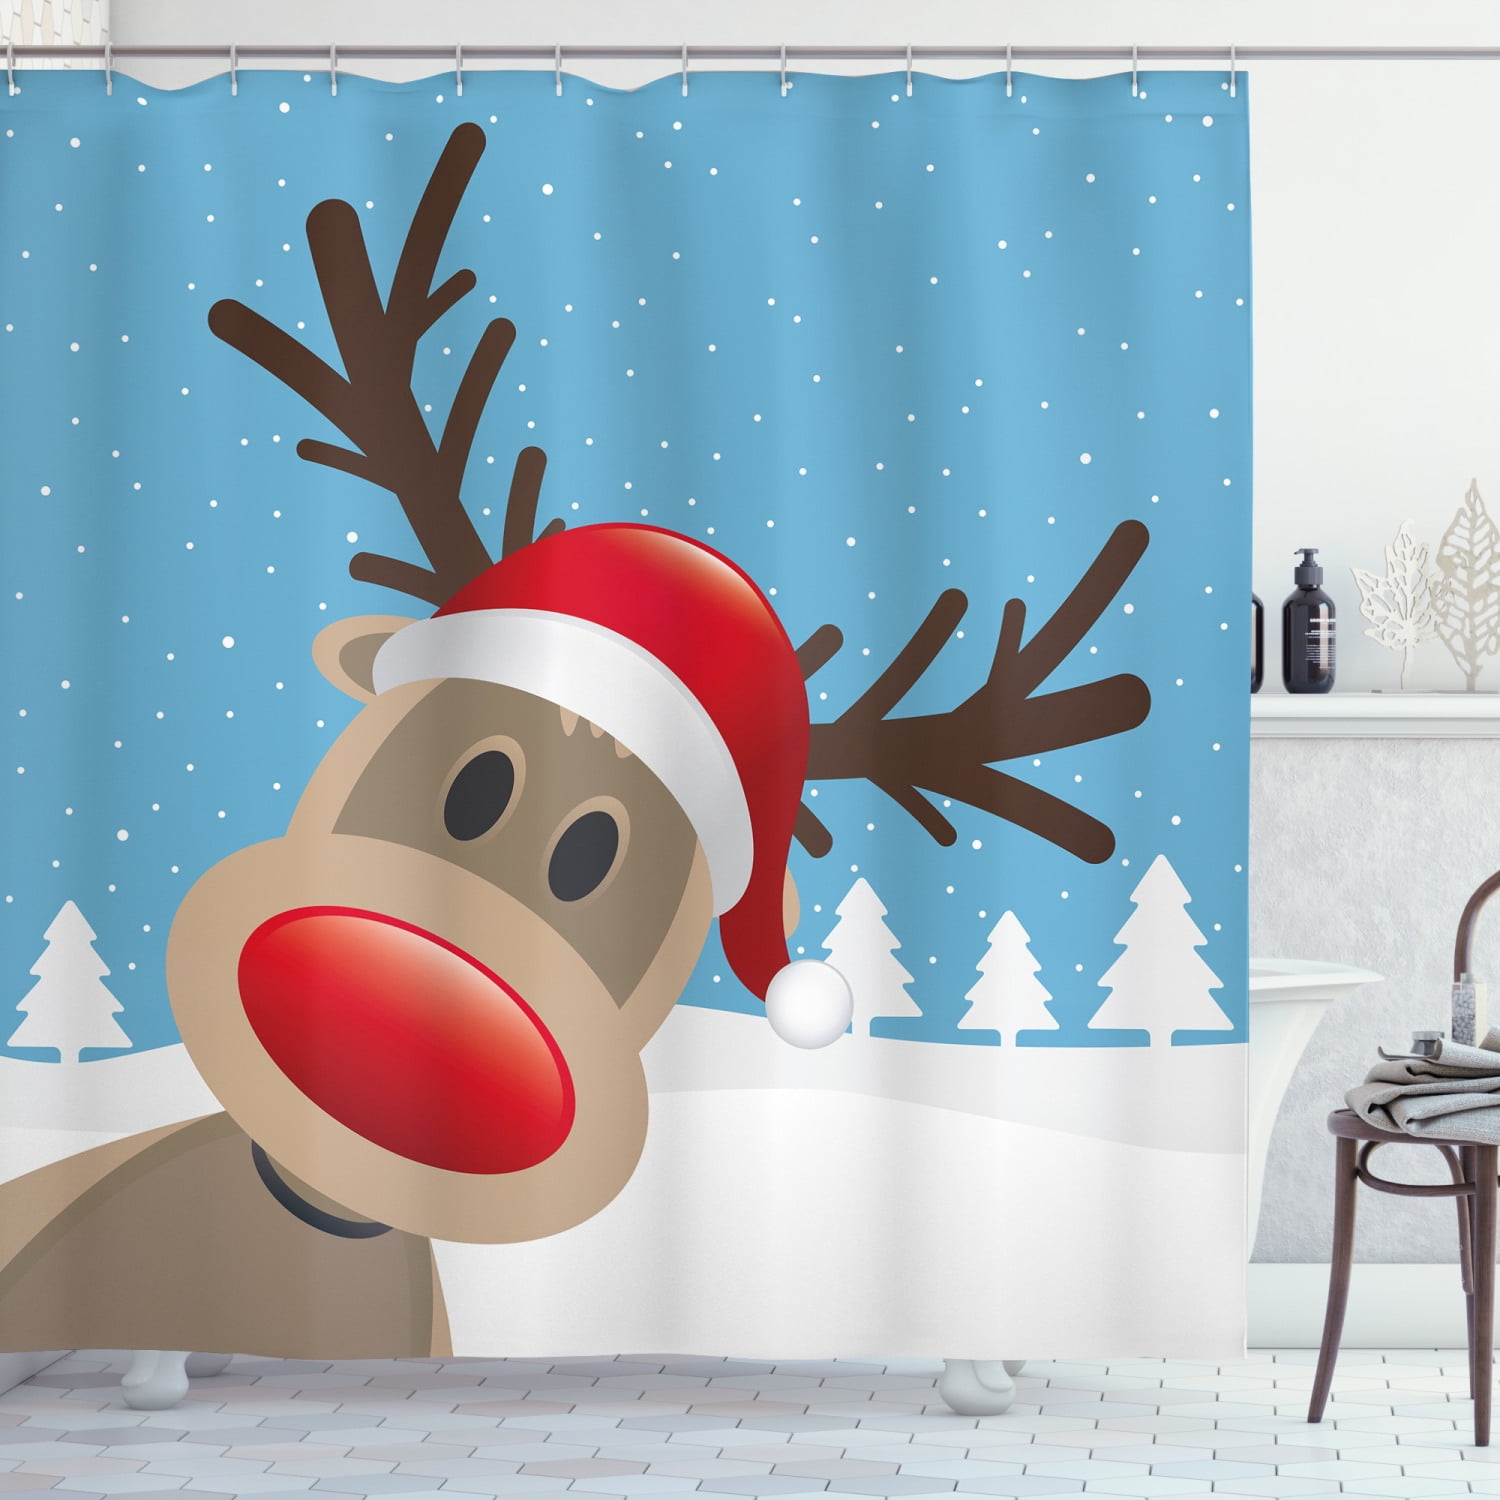 Xmas Decor Santa With Reindeers Wooden Snowy House Fabric Shower Curtain Set 